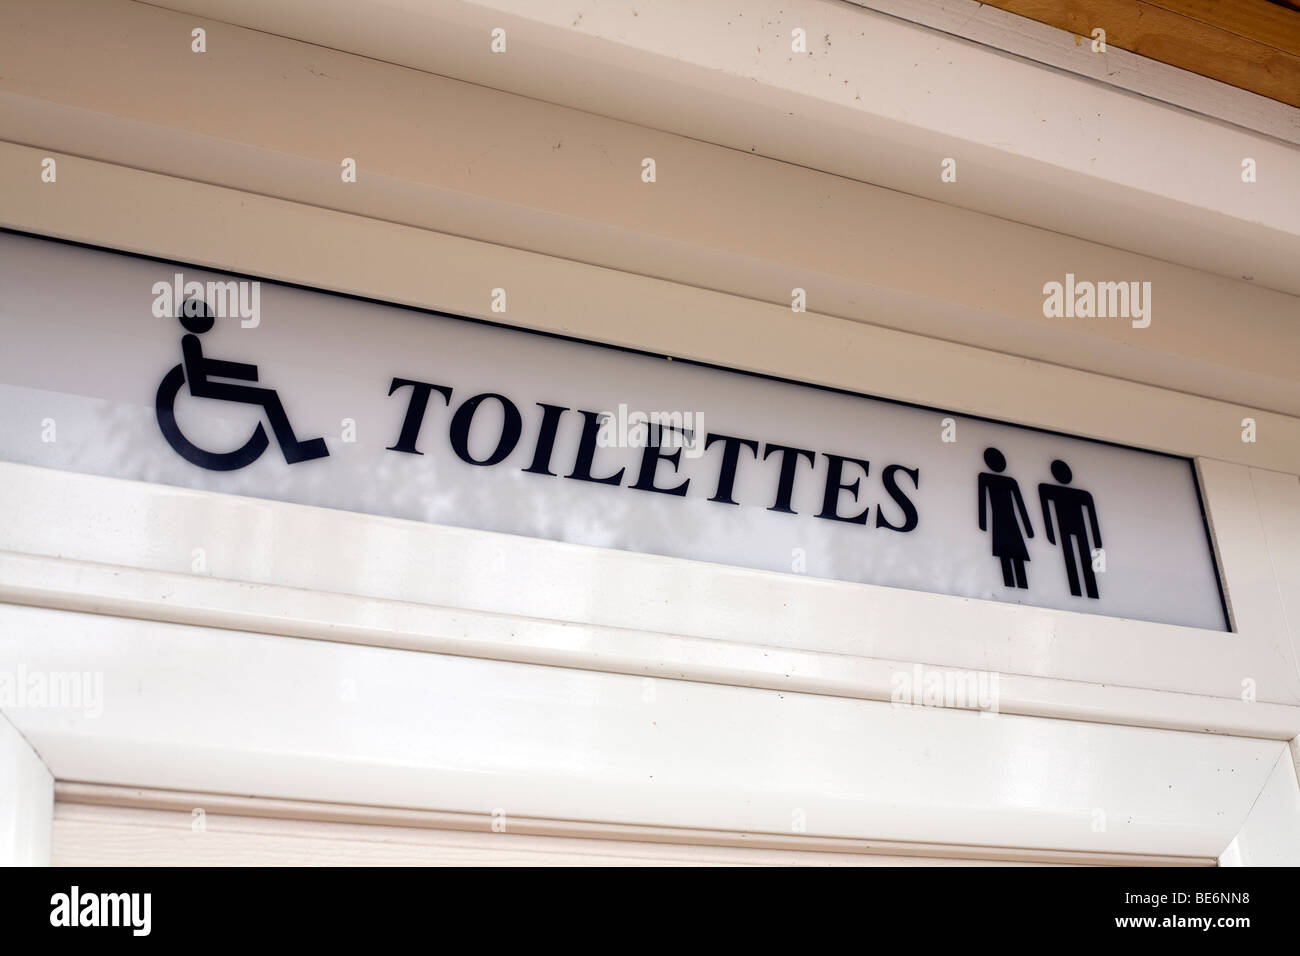 New toilet facility at Hourtin Port on the Lac d'Hourtin near Bordeaux, France for able and disabled members of the public Stock Photo